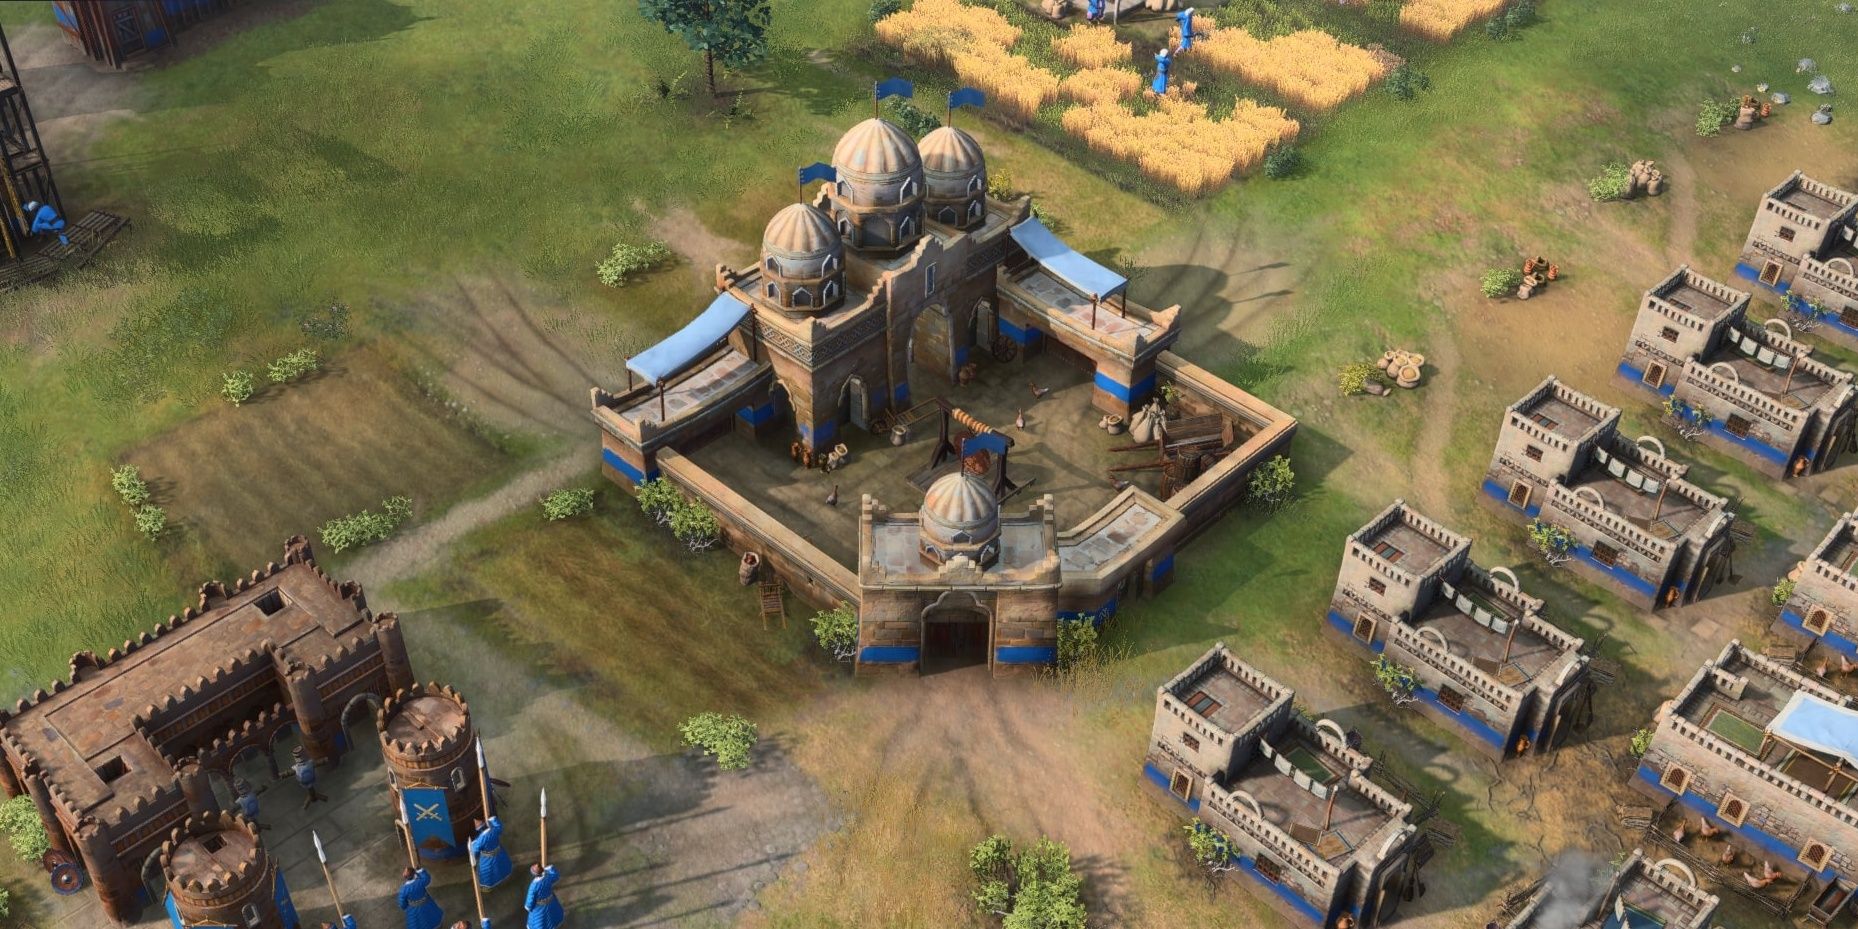 Starting as the Abbasid Dynasty in Age of Empires 4